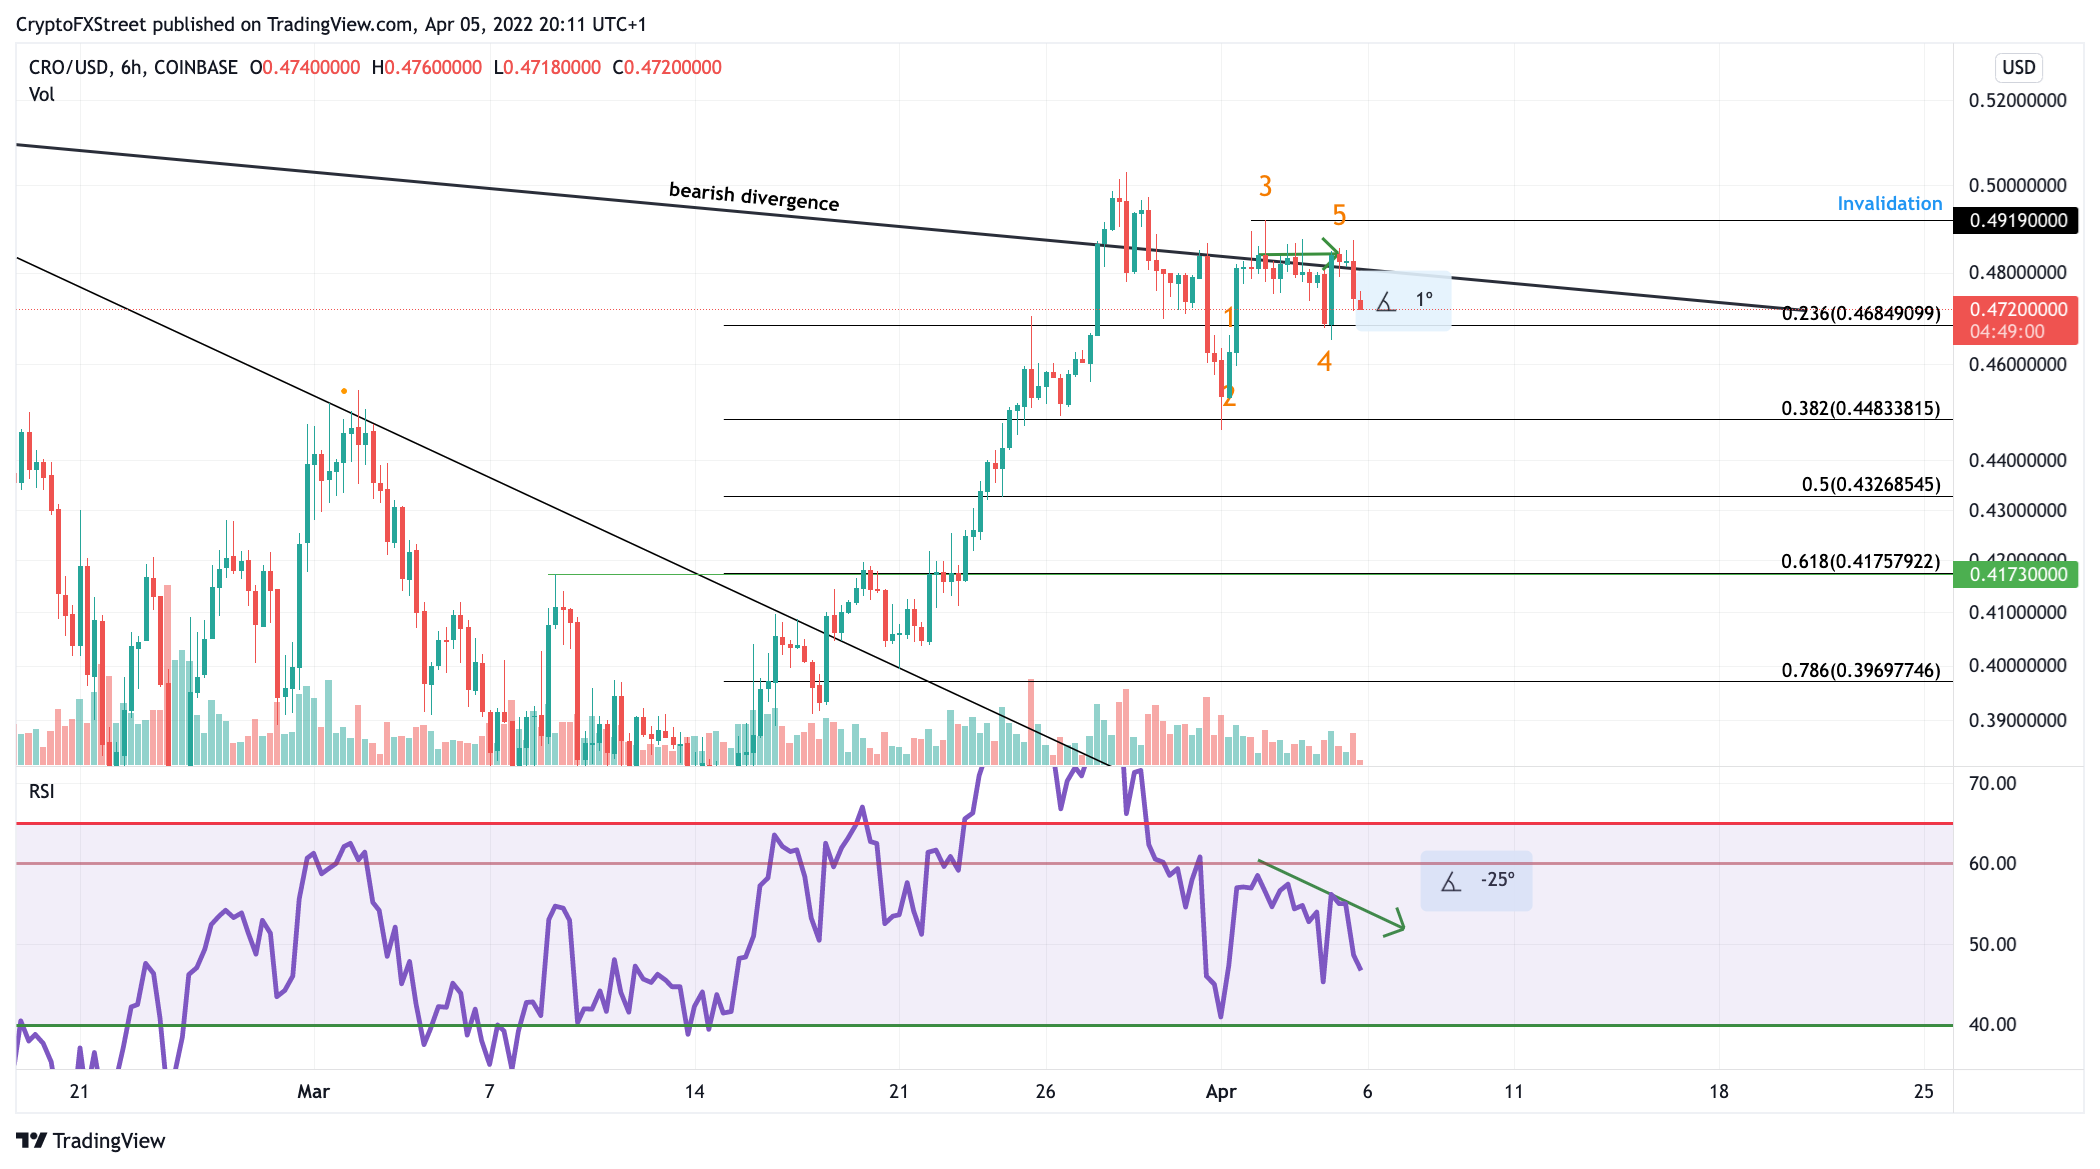 Crypto.com Price in Trouble as Ready for 12% Technicals Correcton